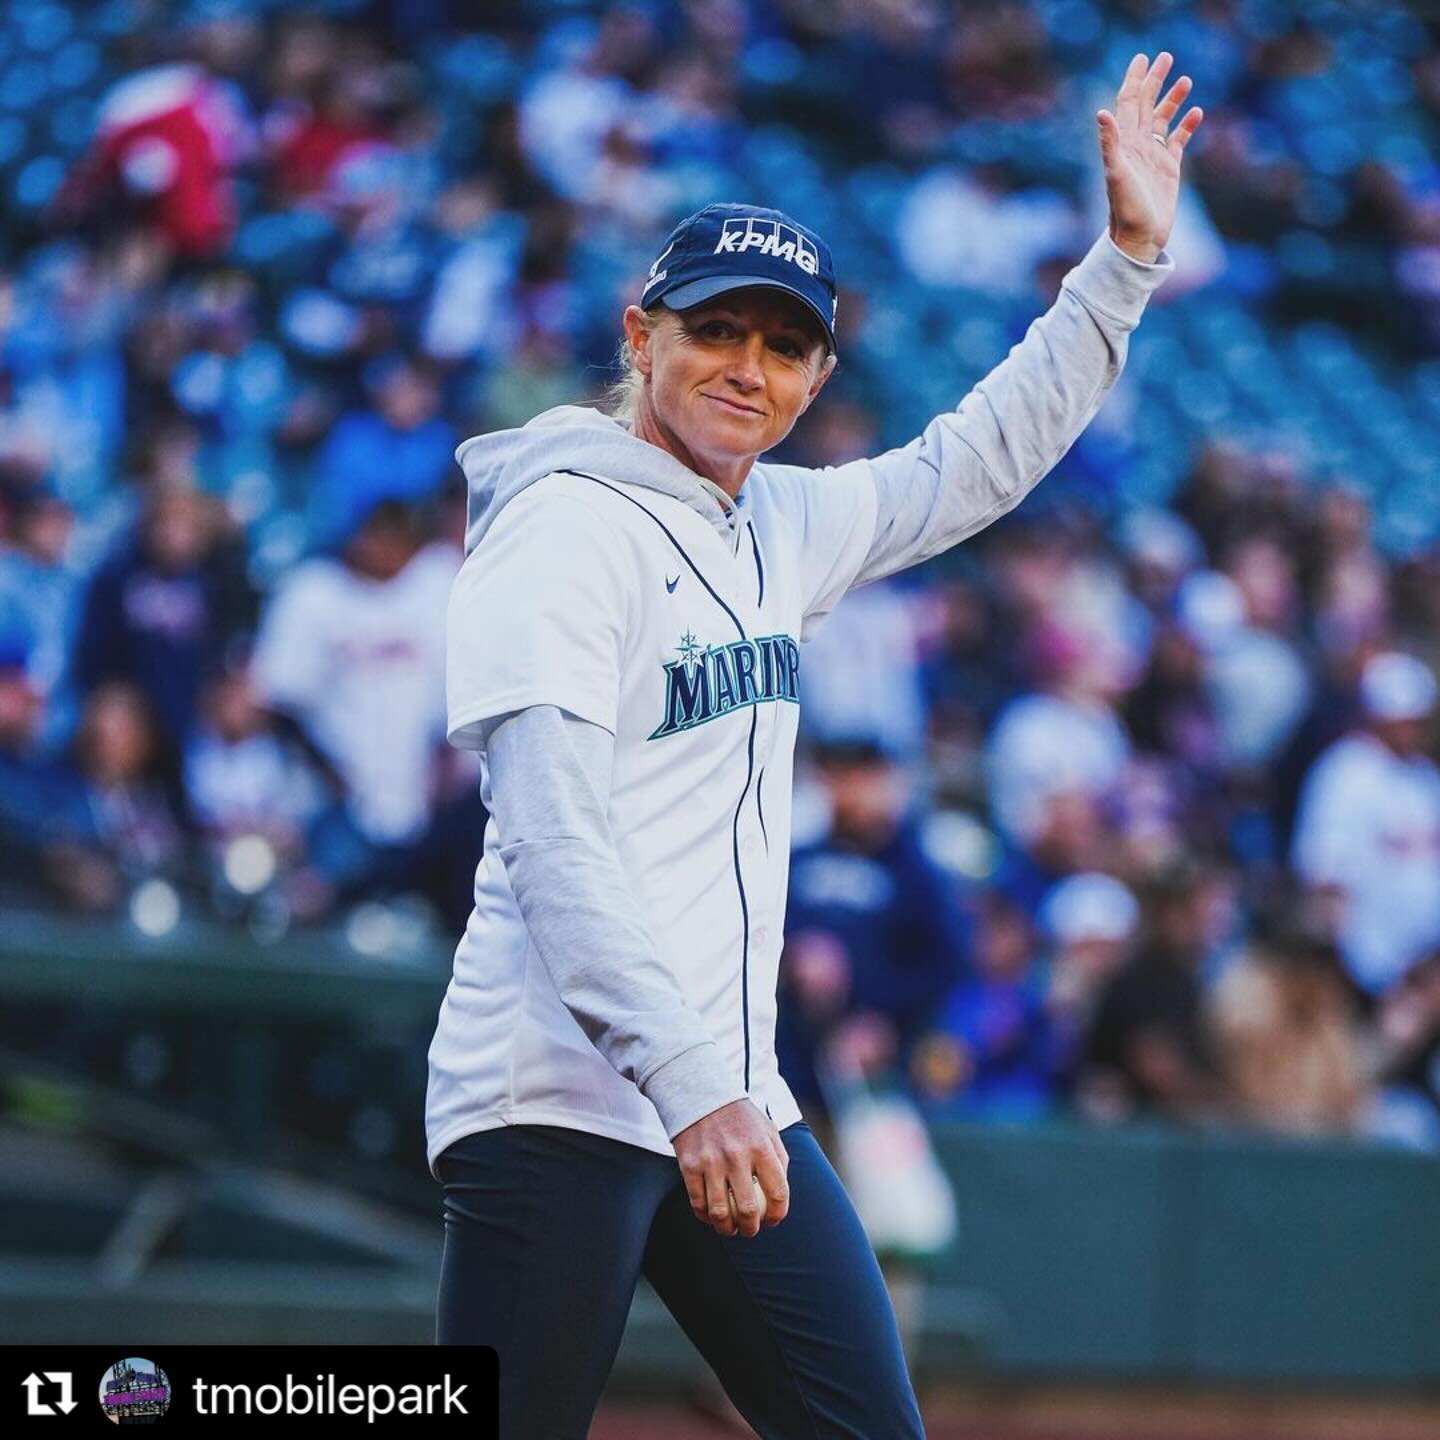 Stacy Lewis threw the ceremonial first pitch at the Mariners game on Tuesday night!
・・・
#Repost @tmobilepark